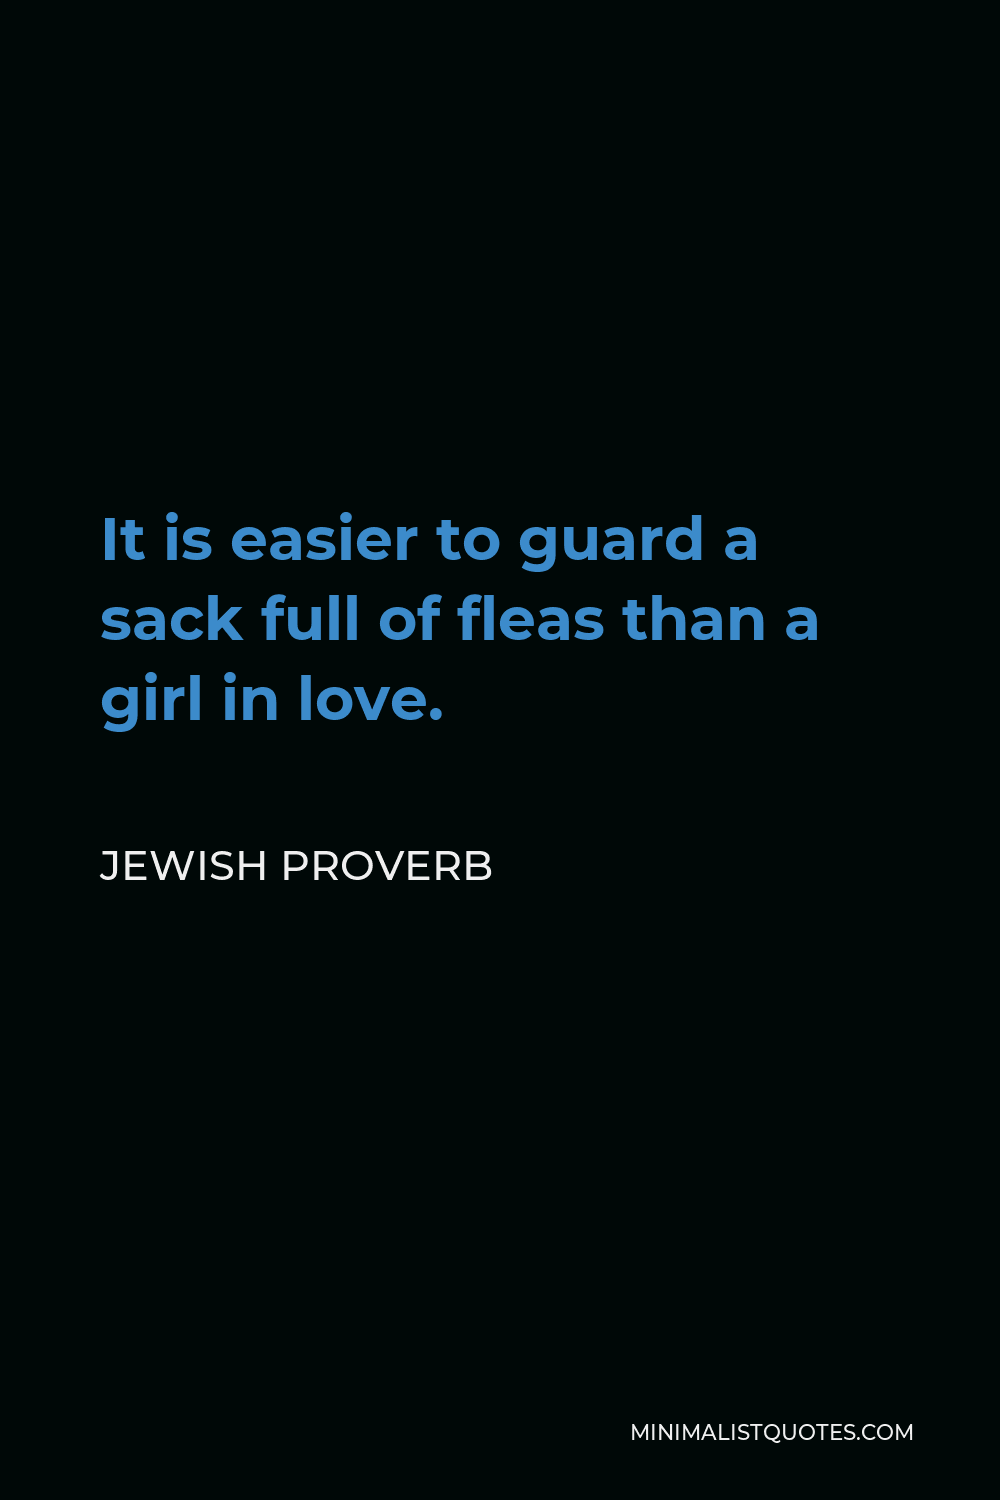 Jewish Proverb Quote - It is easier to guard a sack full of fleas than a girl in love.